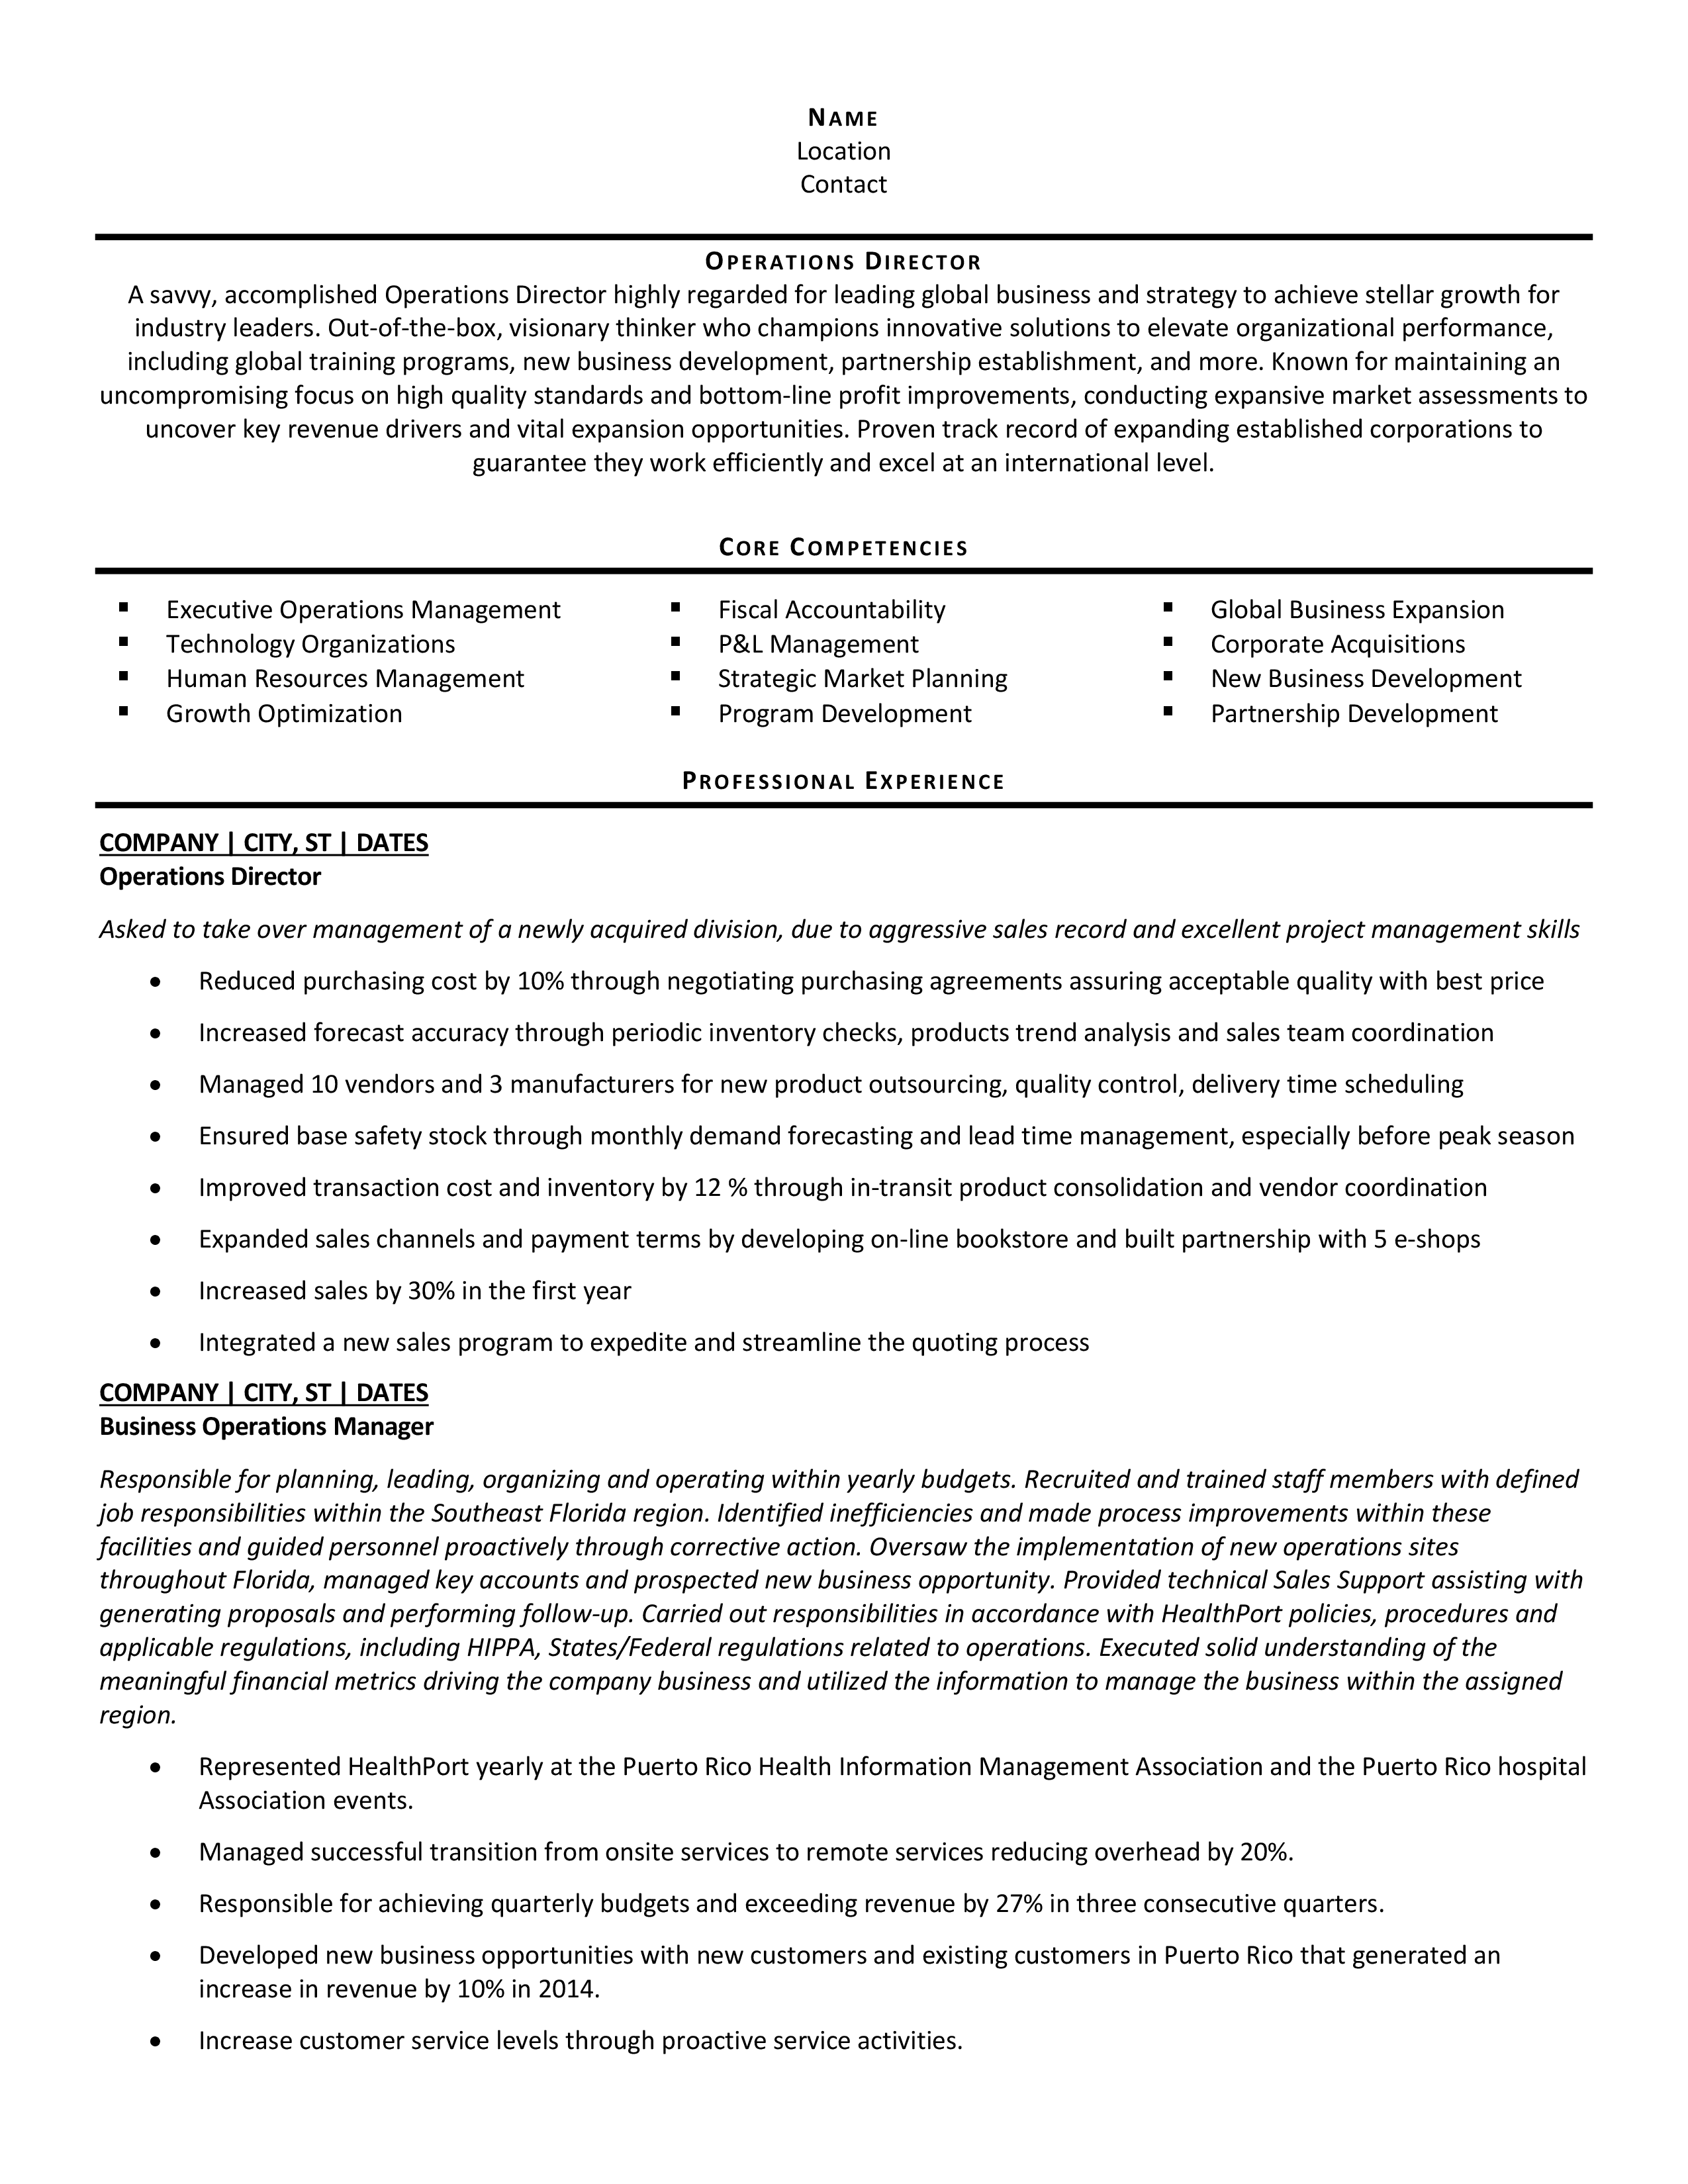 resume summary for operations manager